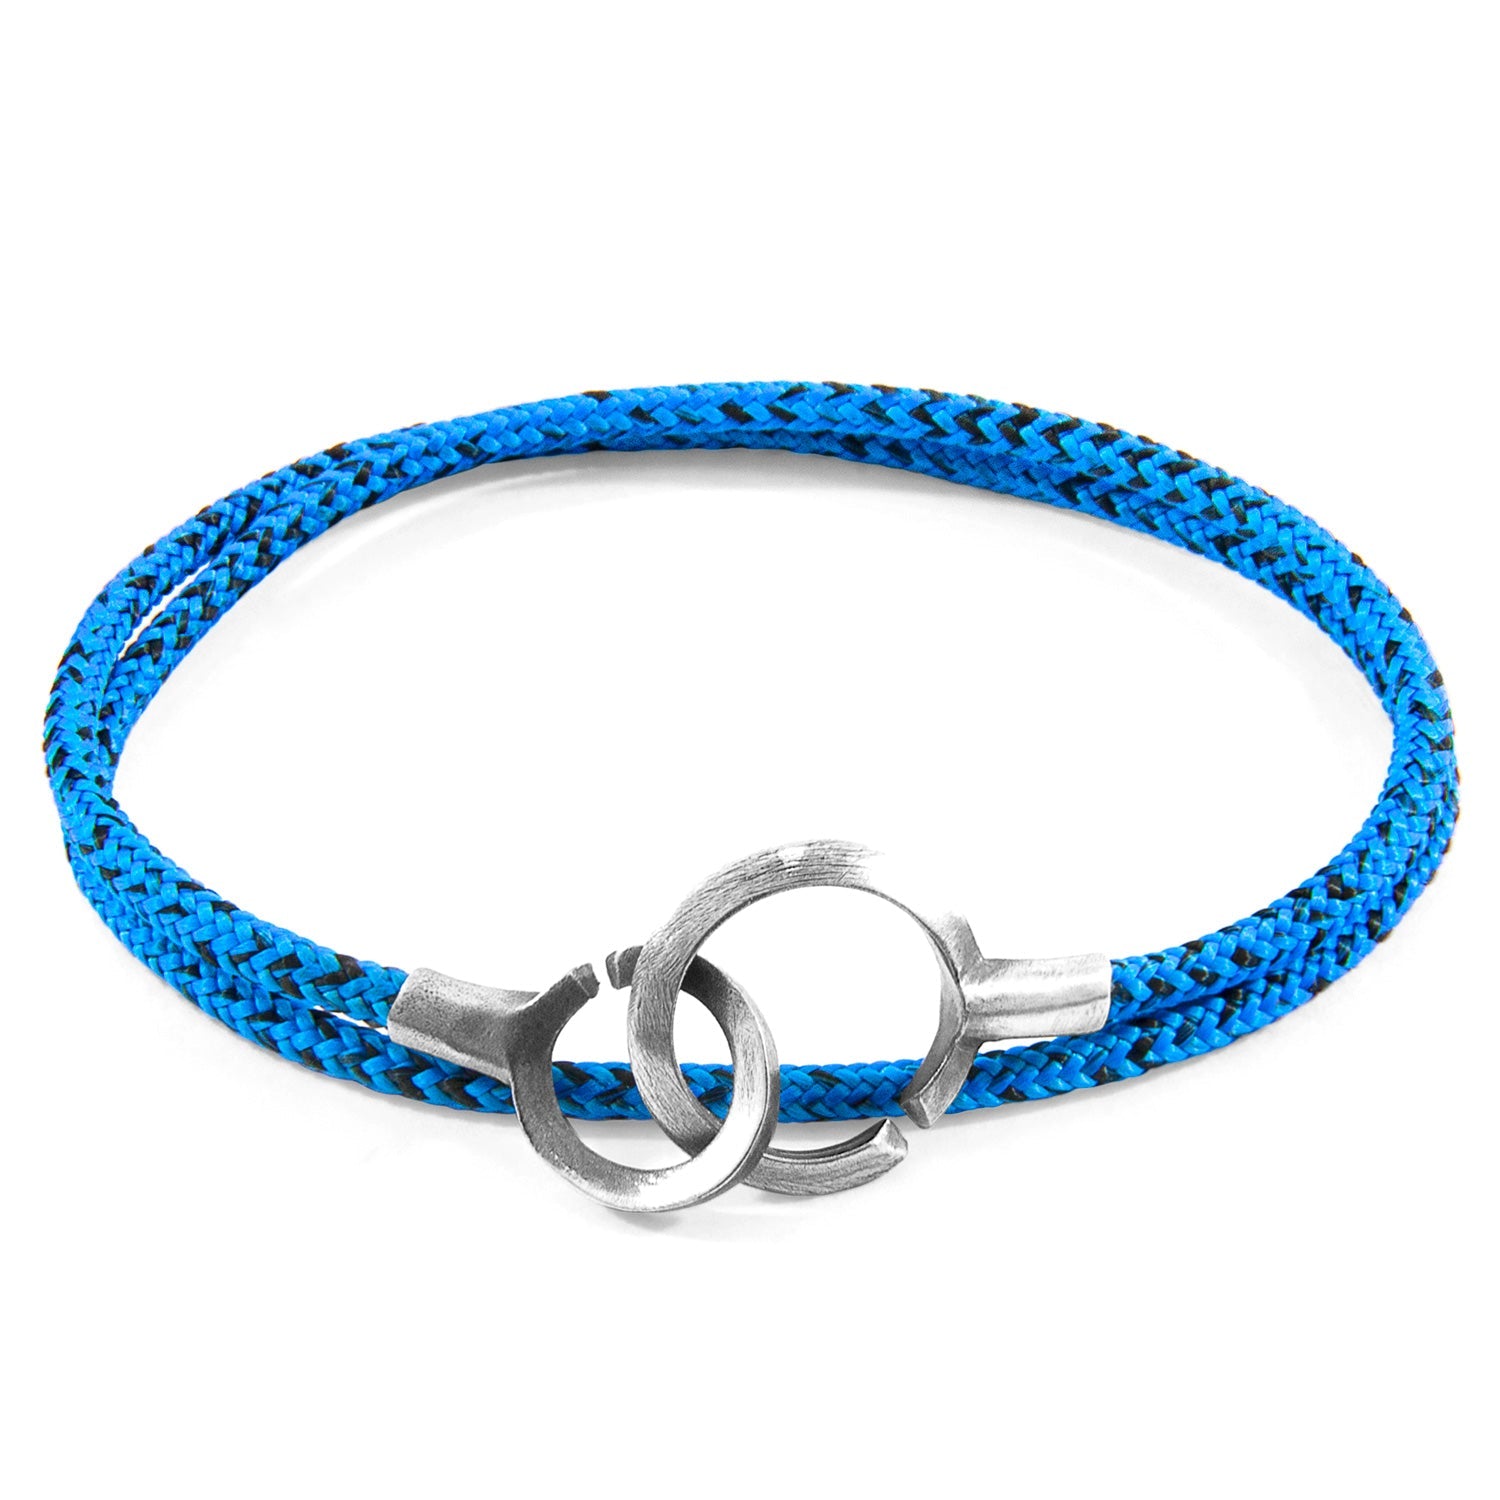 Blue Noir Montrose Silver and Rope Bracelet - Handcrafted in Great Britain with Marine Grade Rope and Sterling Silver Clasps Bijou Her